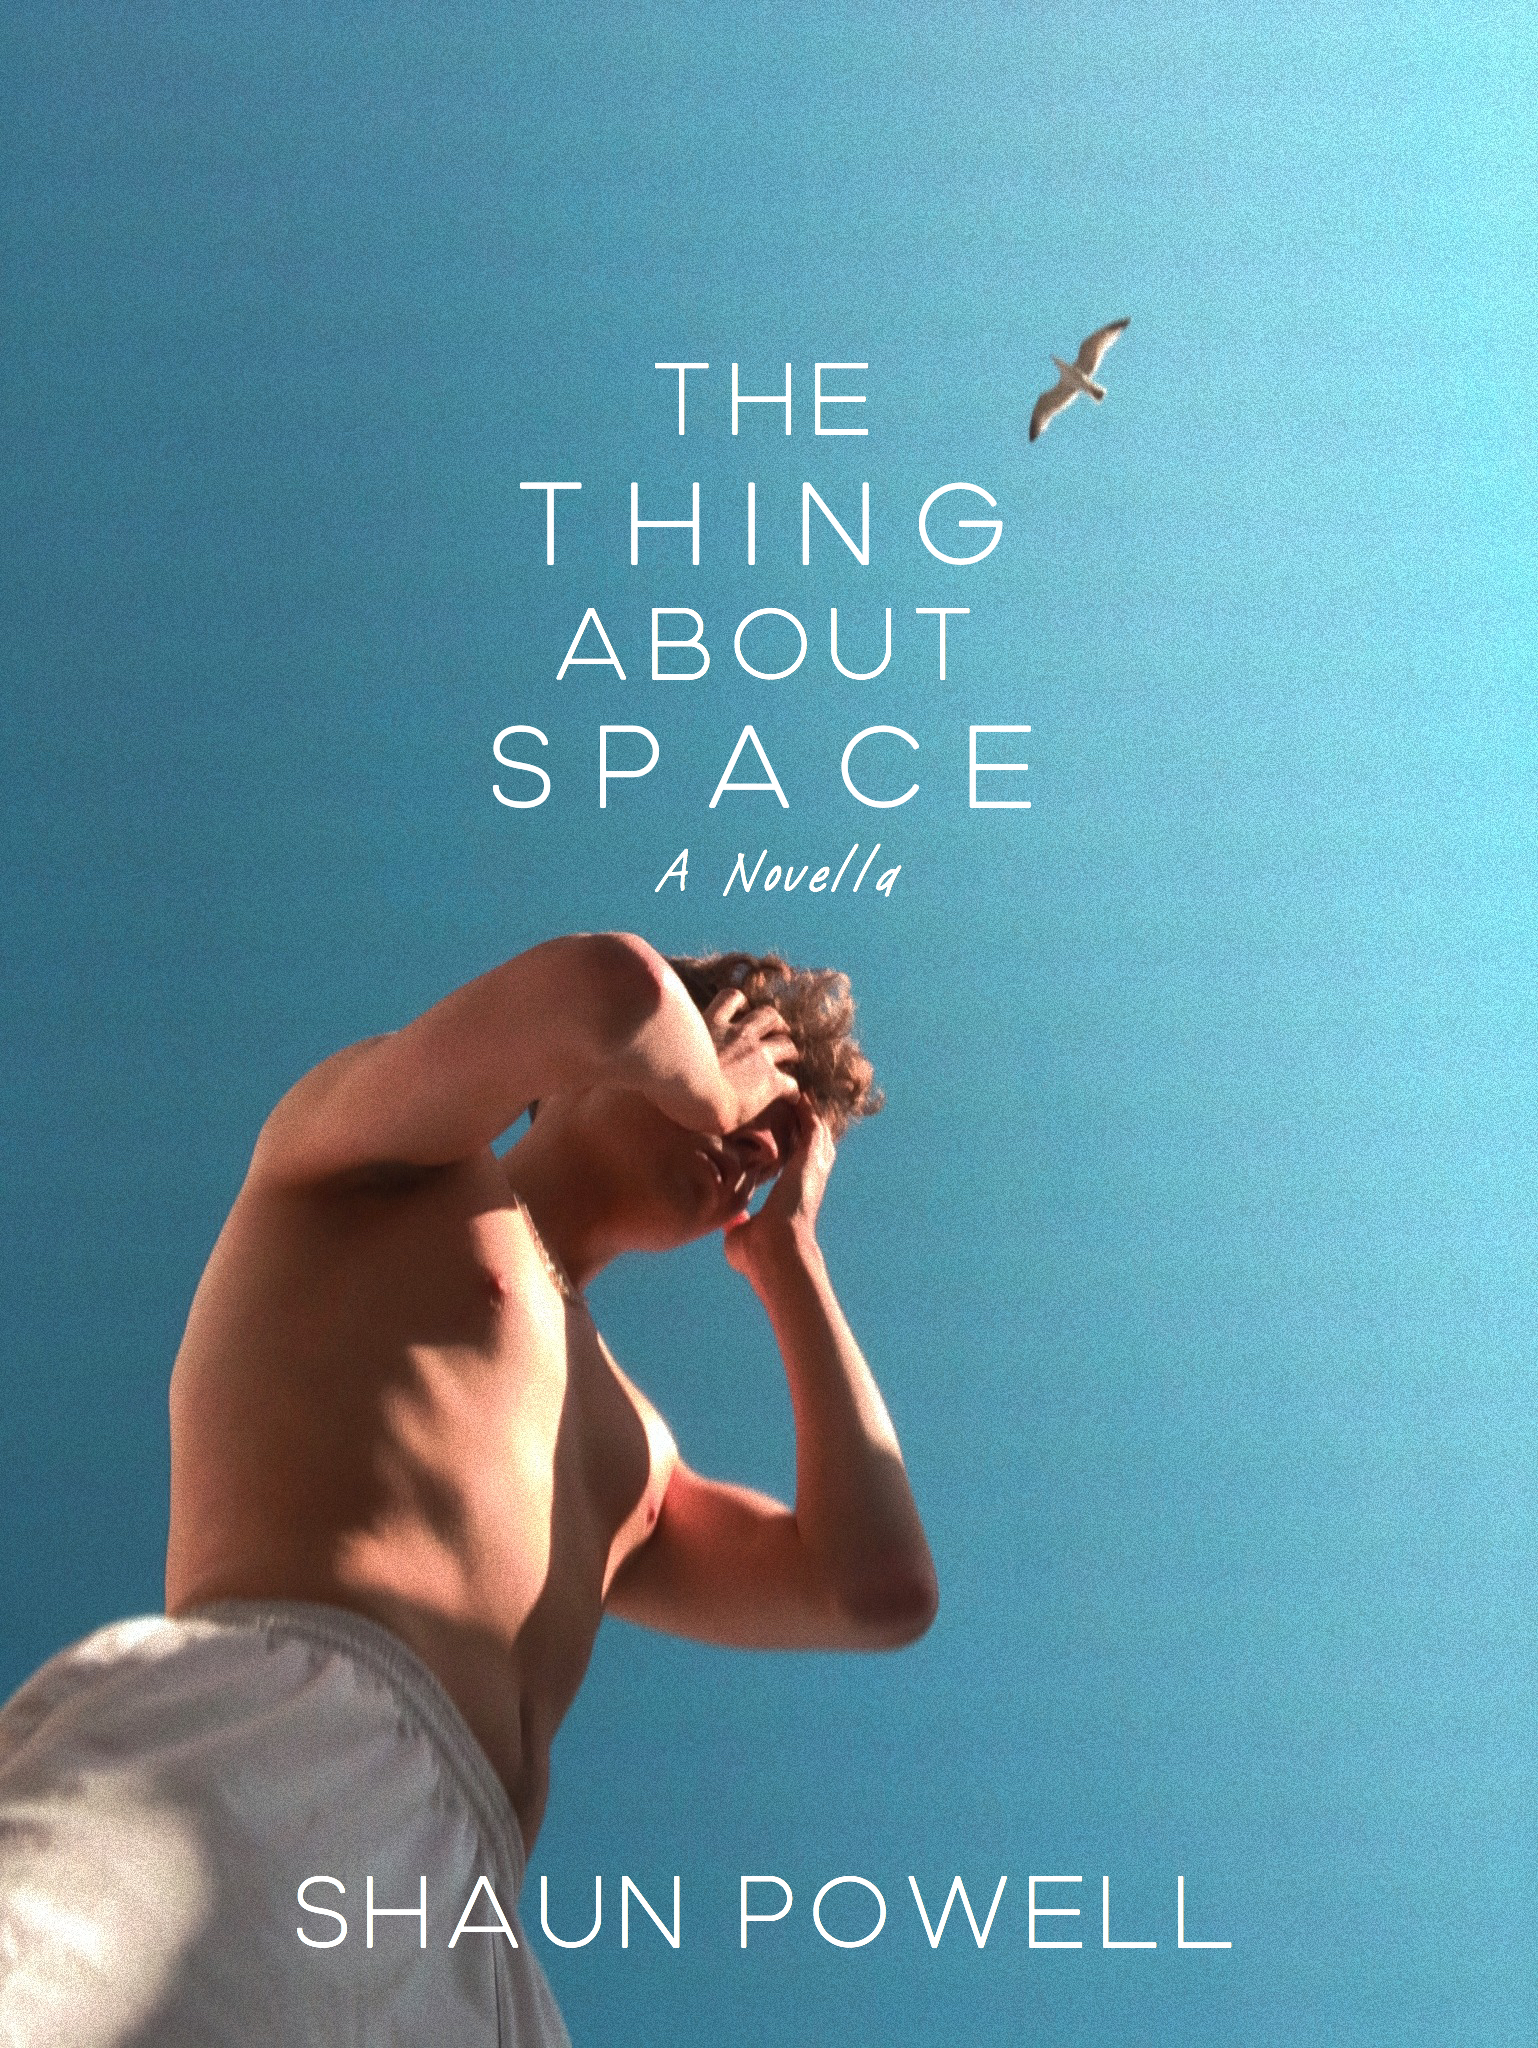 FREE: The Thing About Space by Shaun Powell